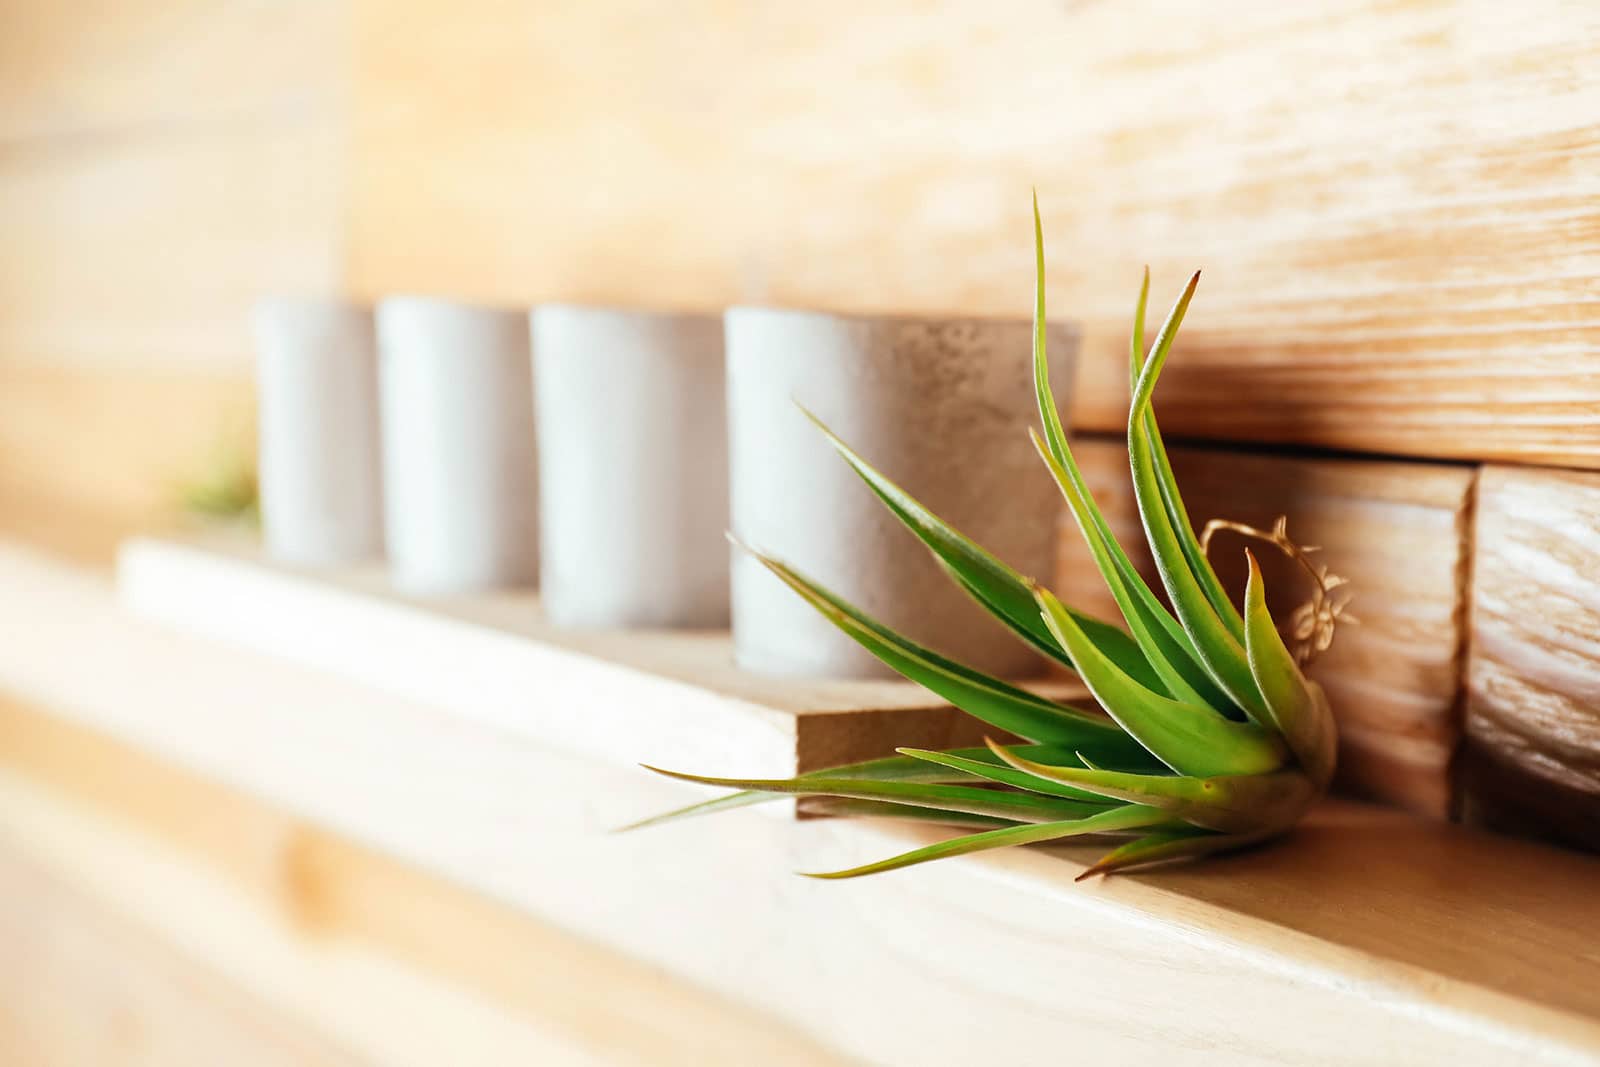 Air plant displayed simply on a wooden shelf next to a series of white votive candles